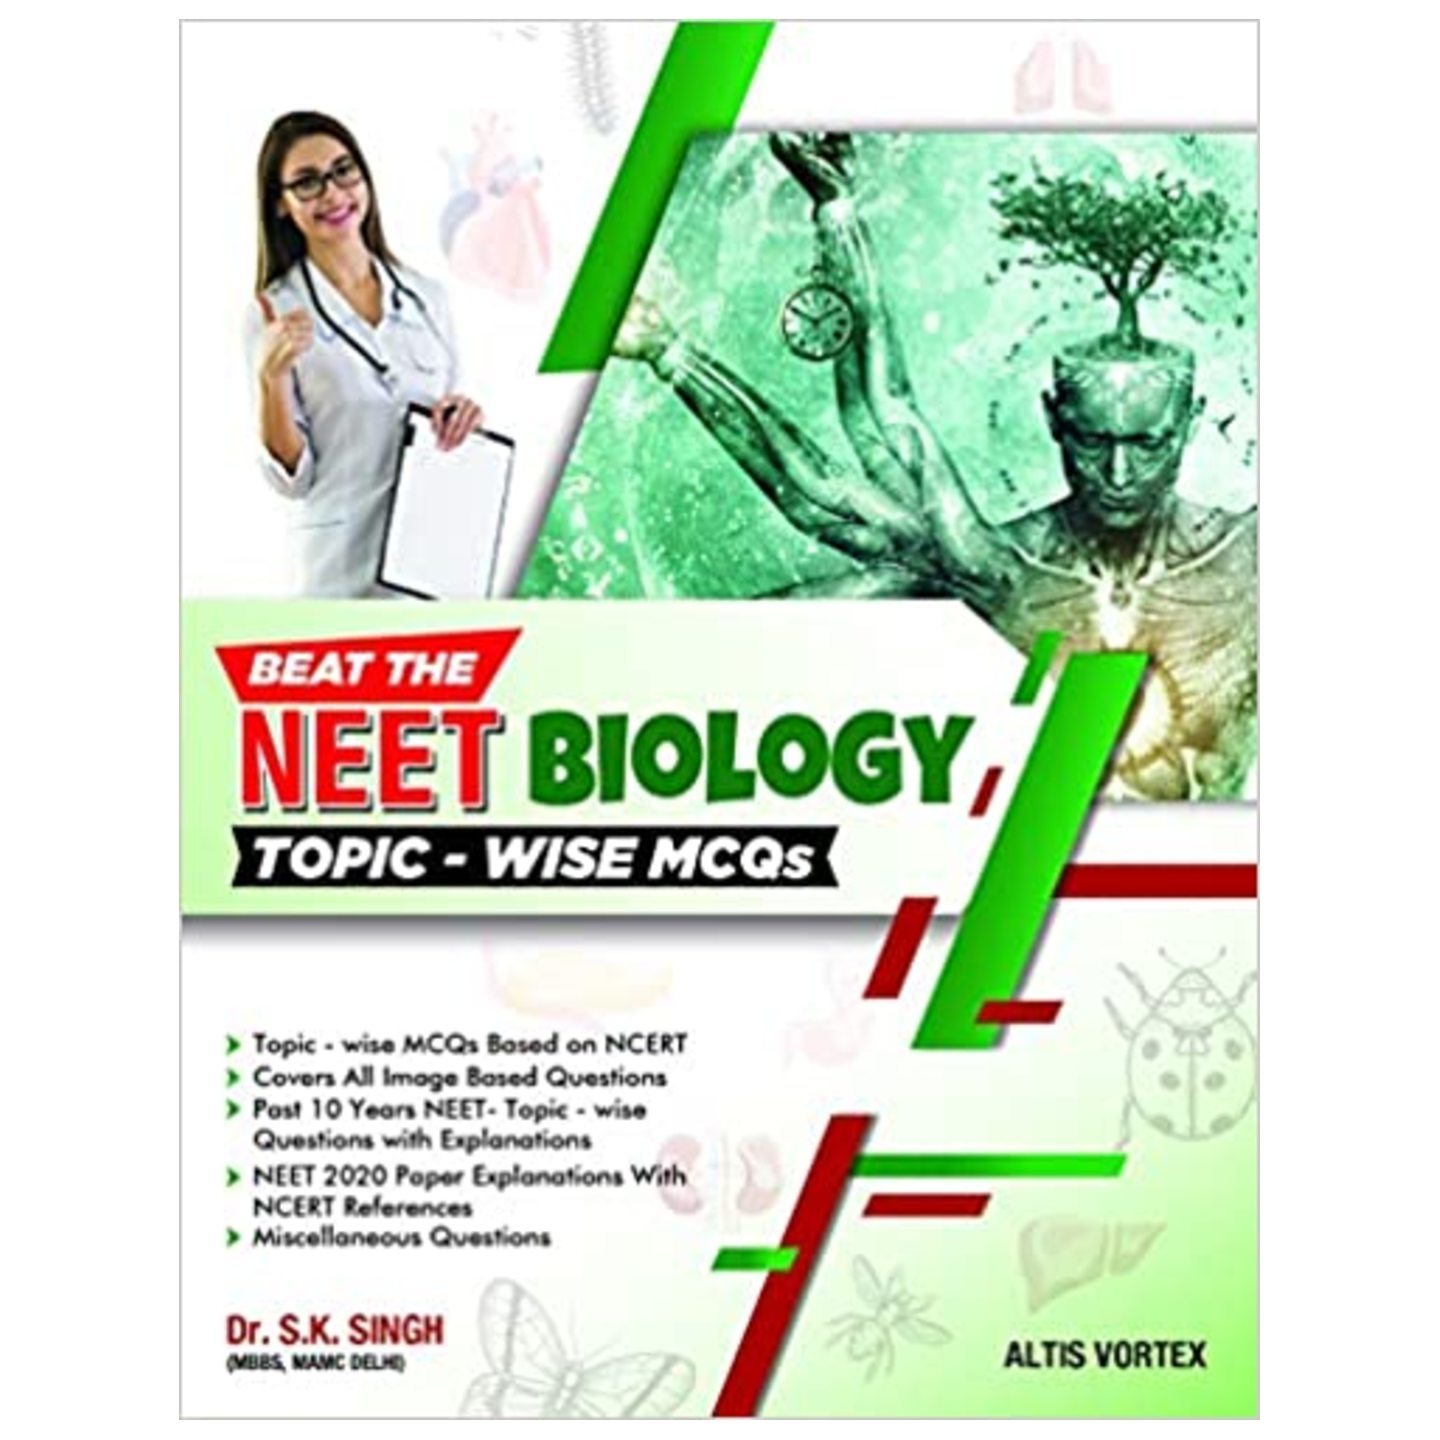 Beat the NEET Biology Topic-wise MCQs